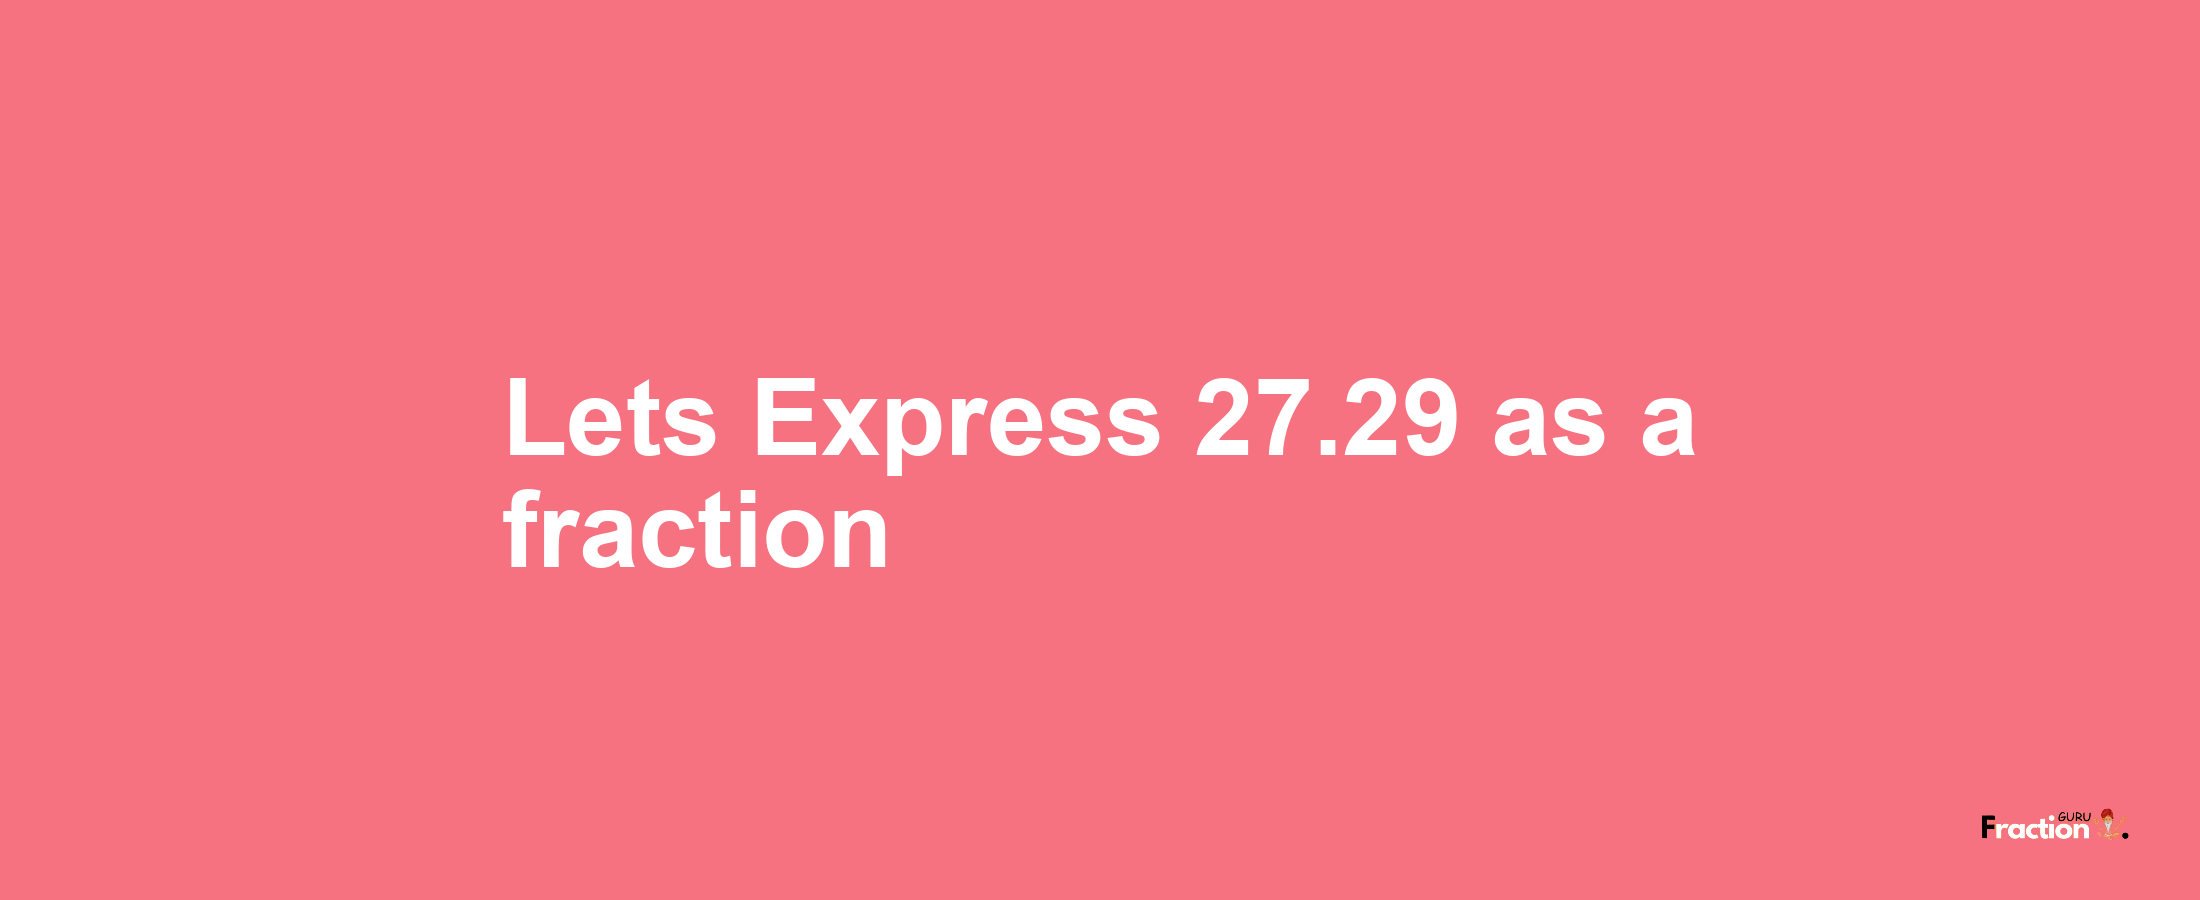 Lets Express 27.29 as afraction